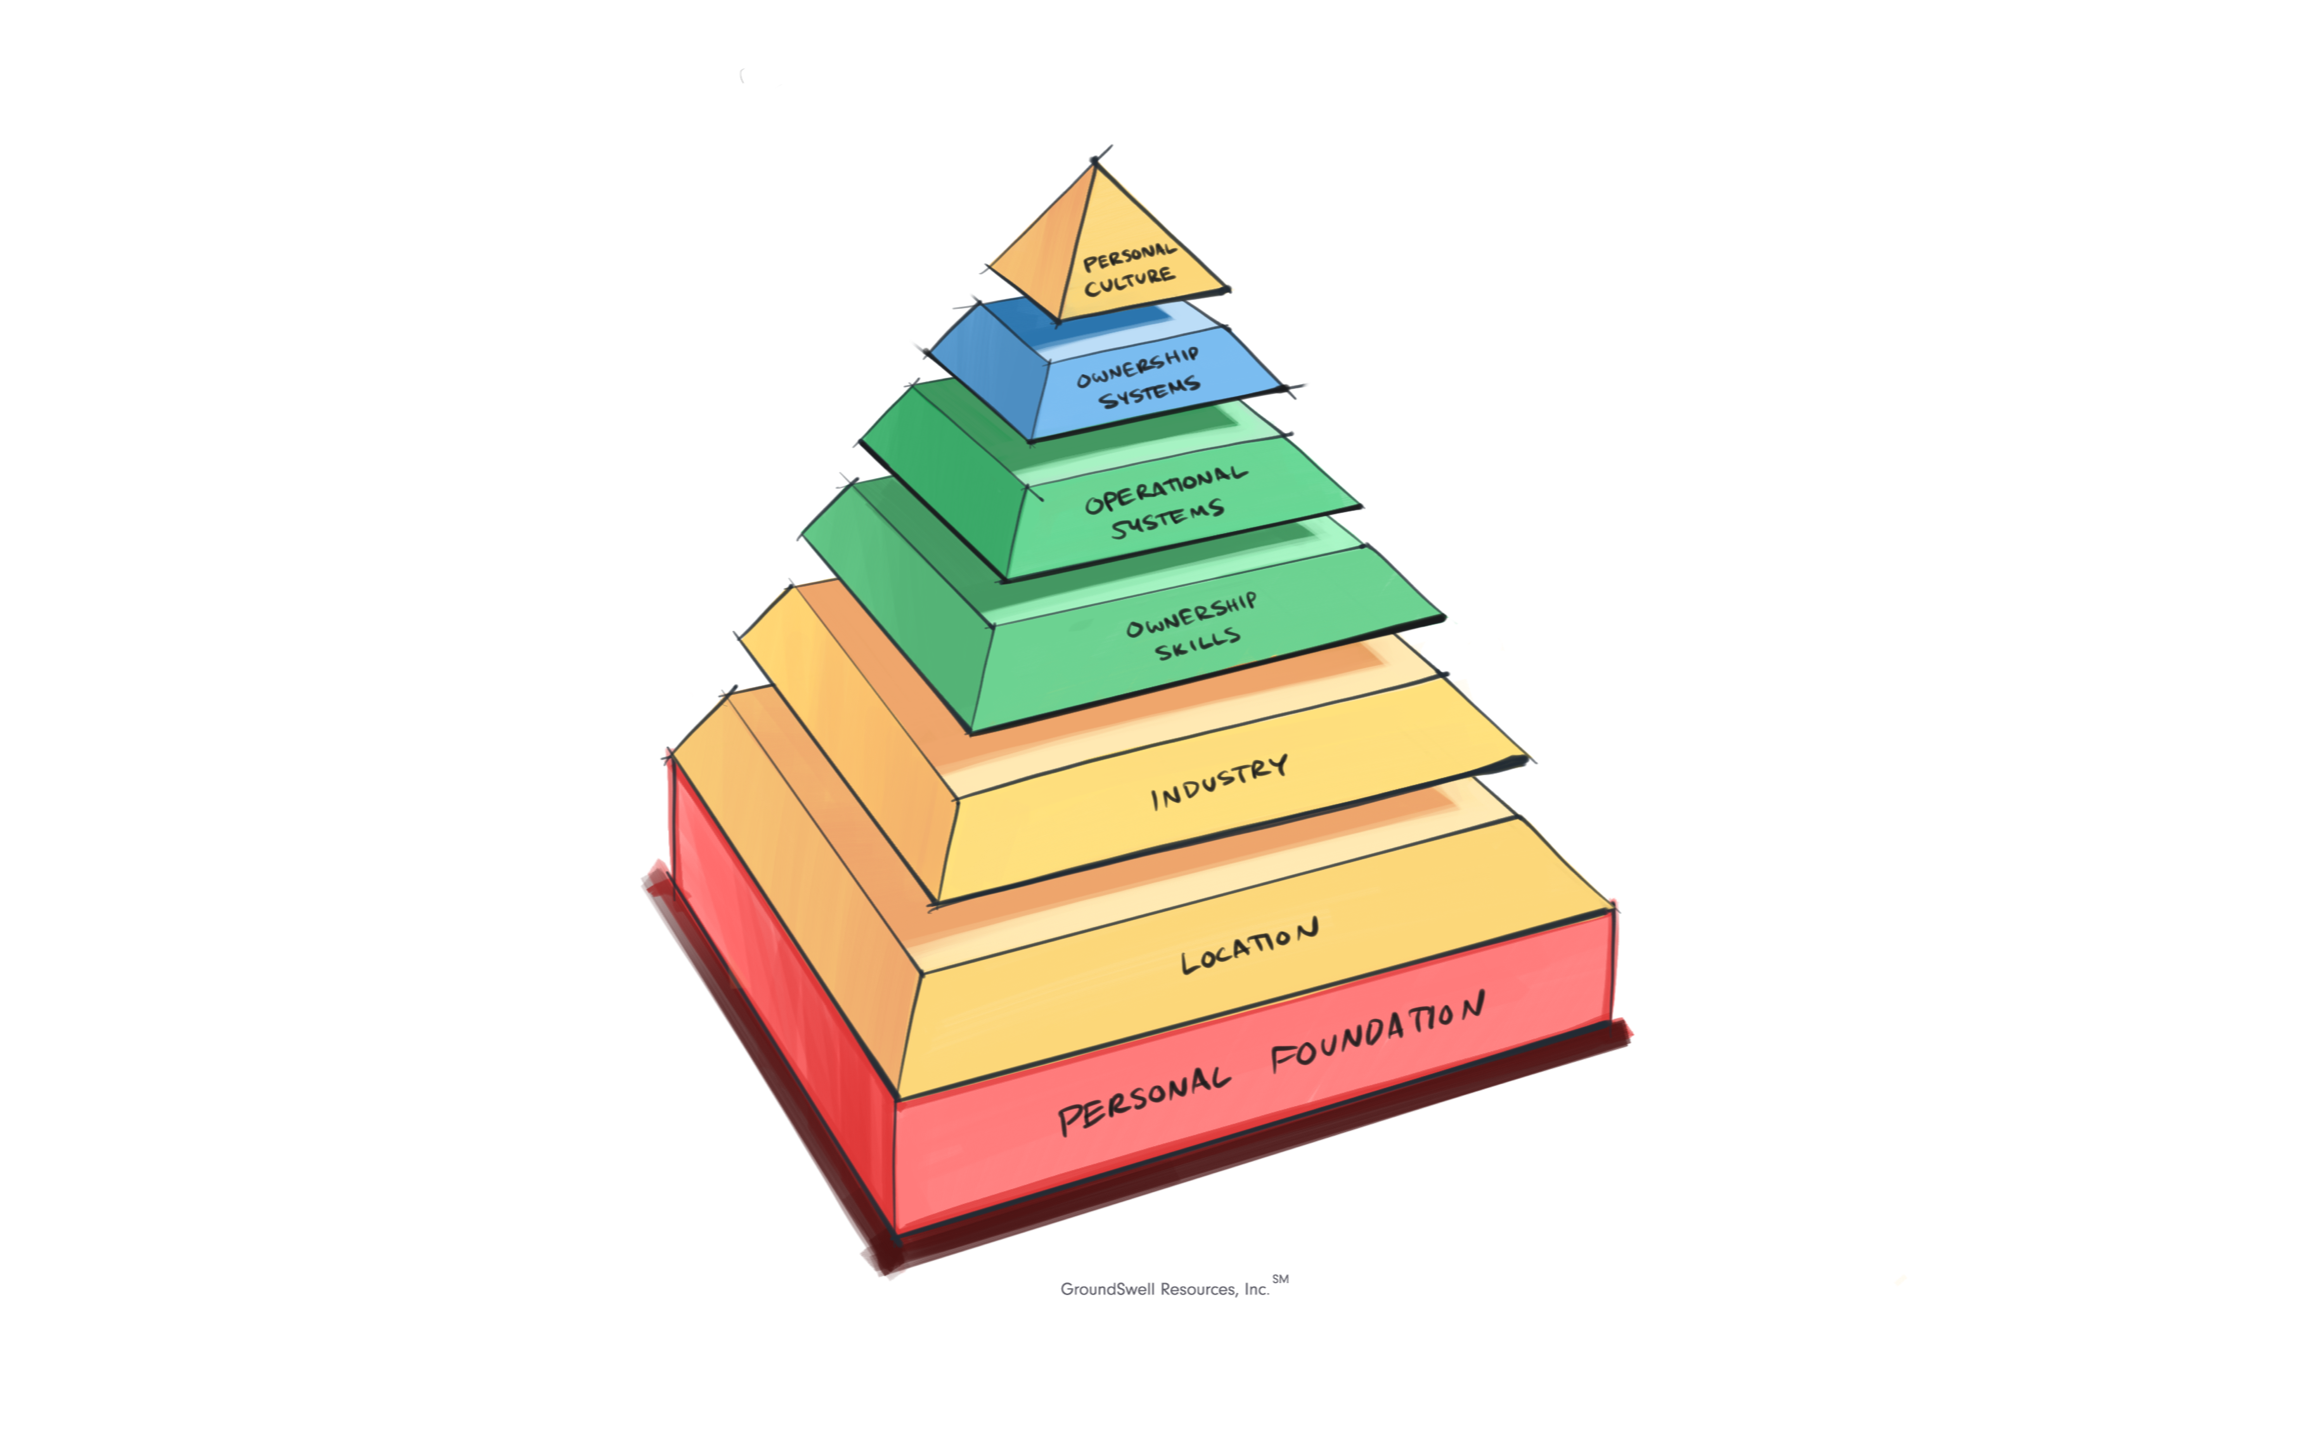 pyramid with personal foundation as base followed by location, industry, ownership skills, operational systems, ownership systems, and personal culture at top